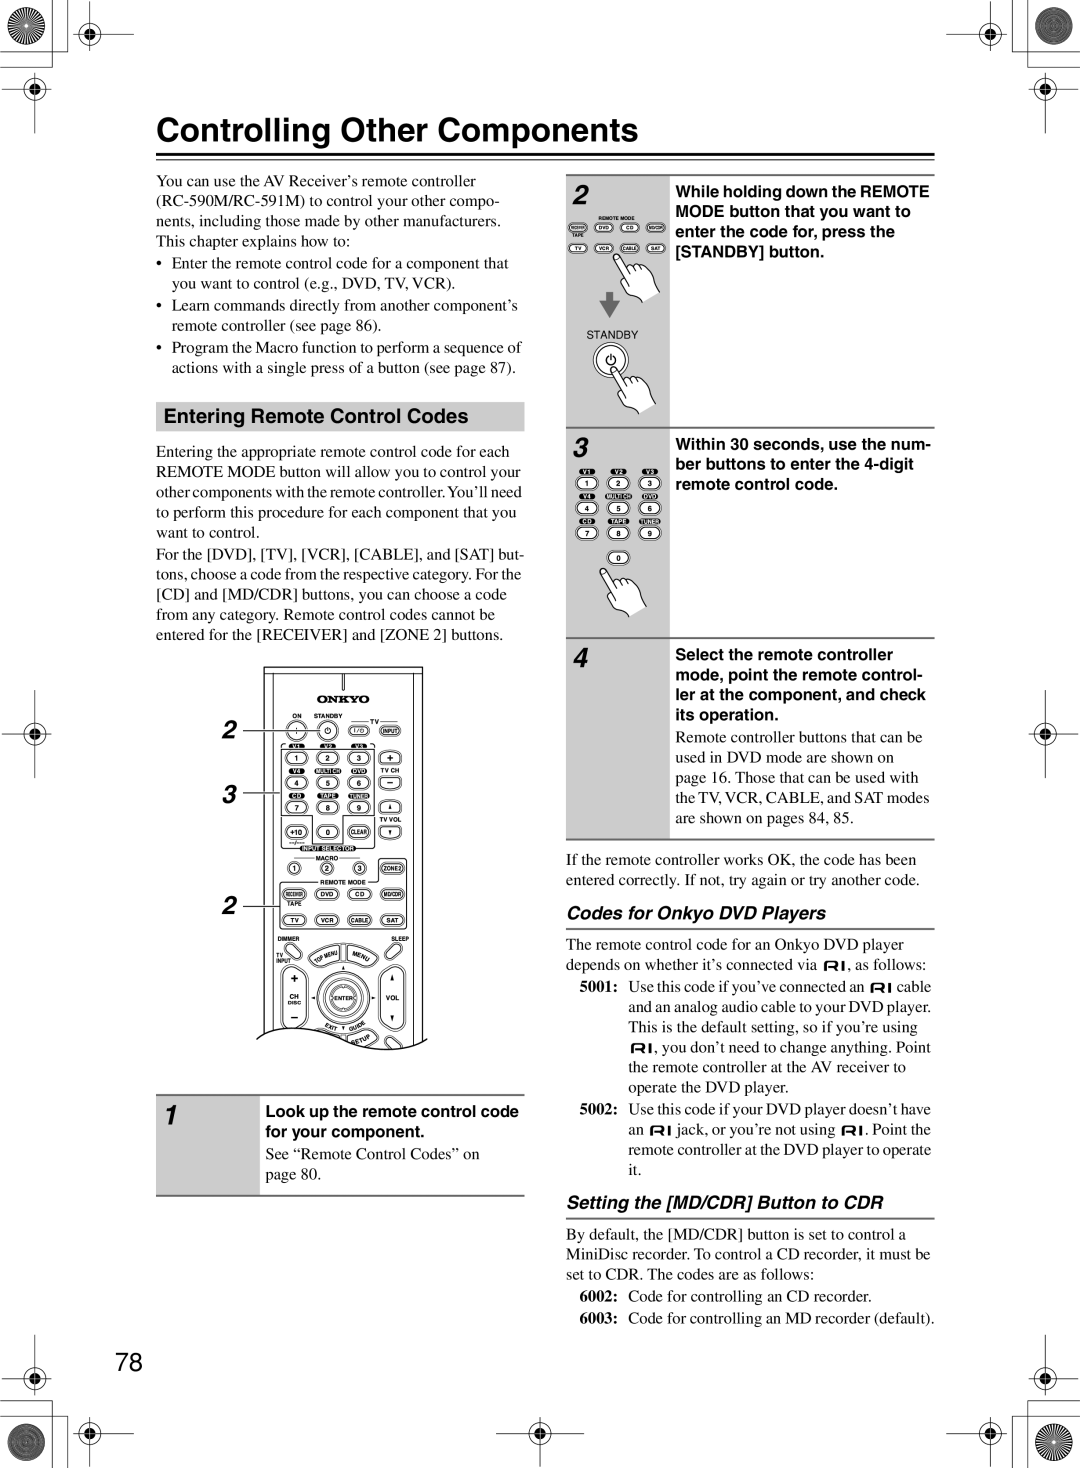 Onkyo TX-SR8360 Controlling Other Components, Entering Remote Control Codes, Codes for Onkyo DVD Players, page 